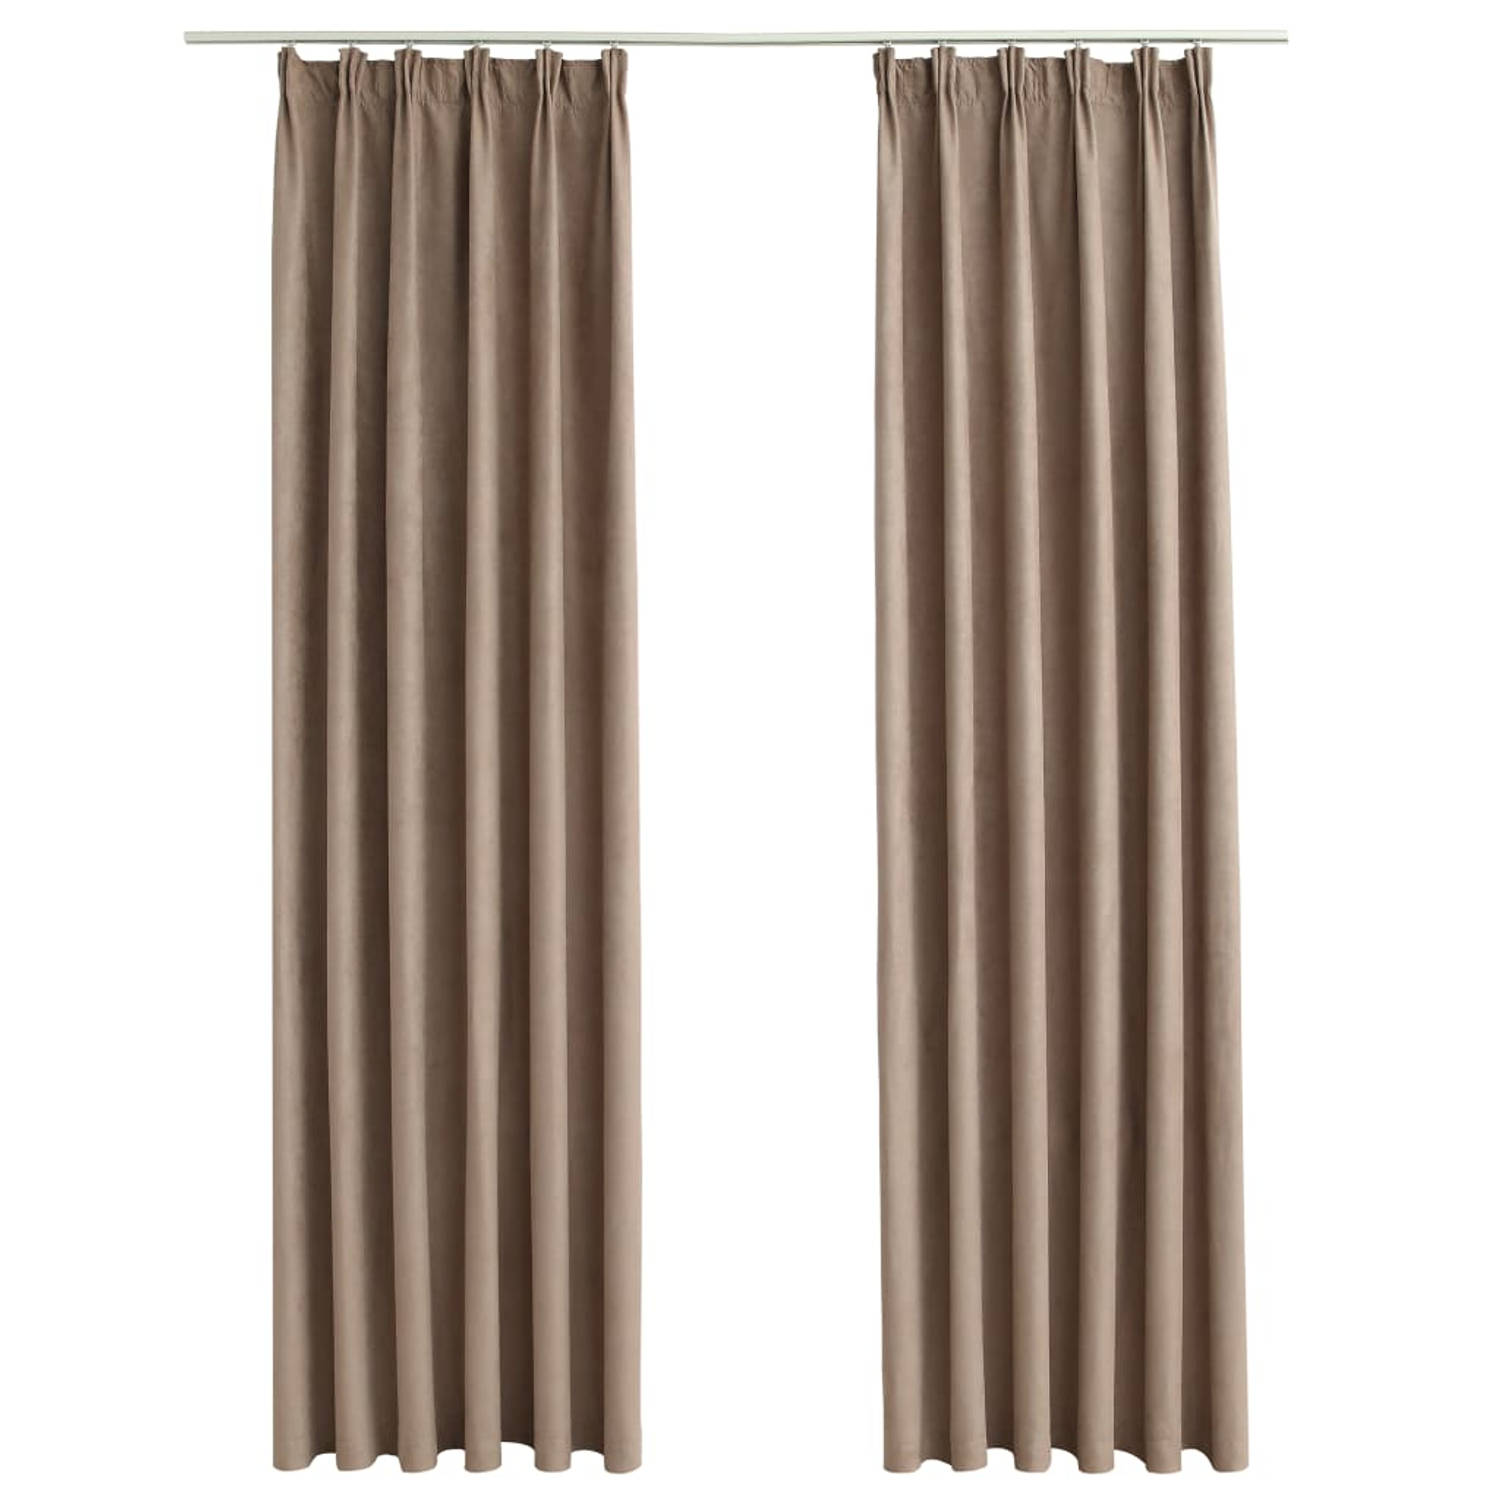 The Living Store Gordijnen Luxe Taupe 140x175 cm - Suède-touch - Polyester